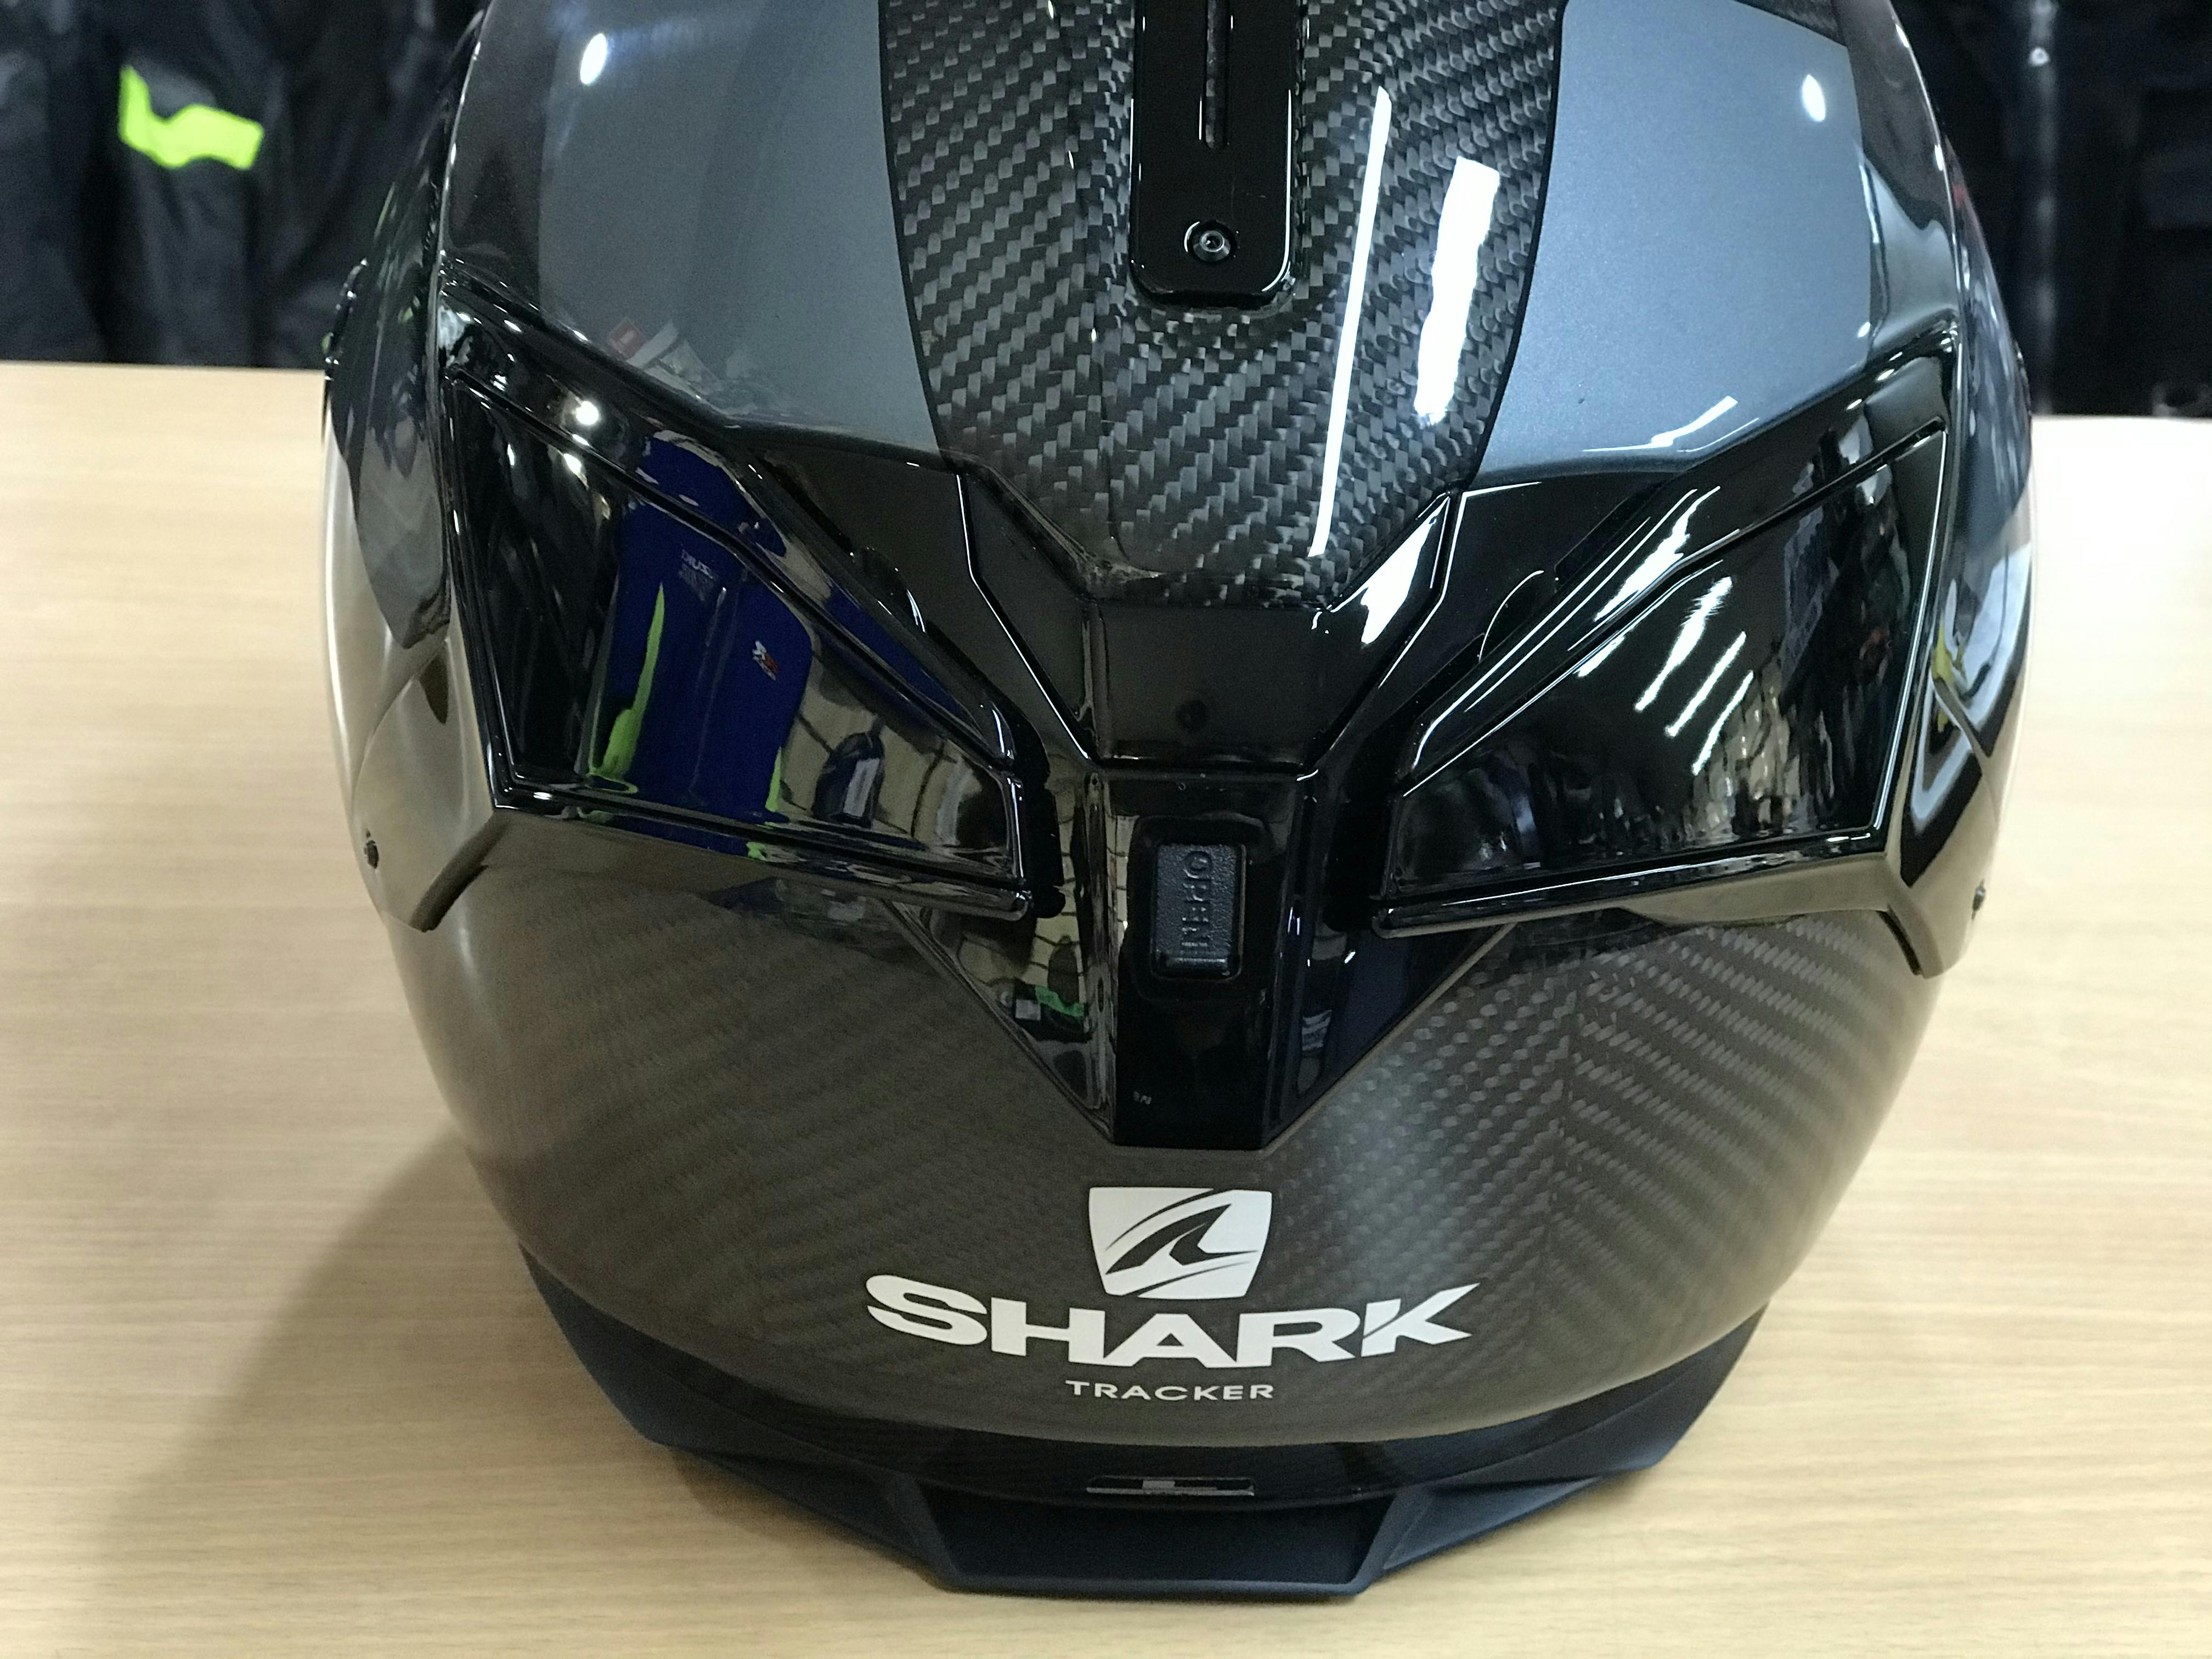 The rear and the fins of the helmet on the Shark Carbon Spartan GT